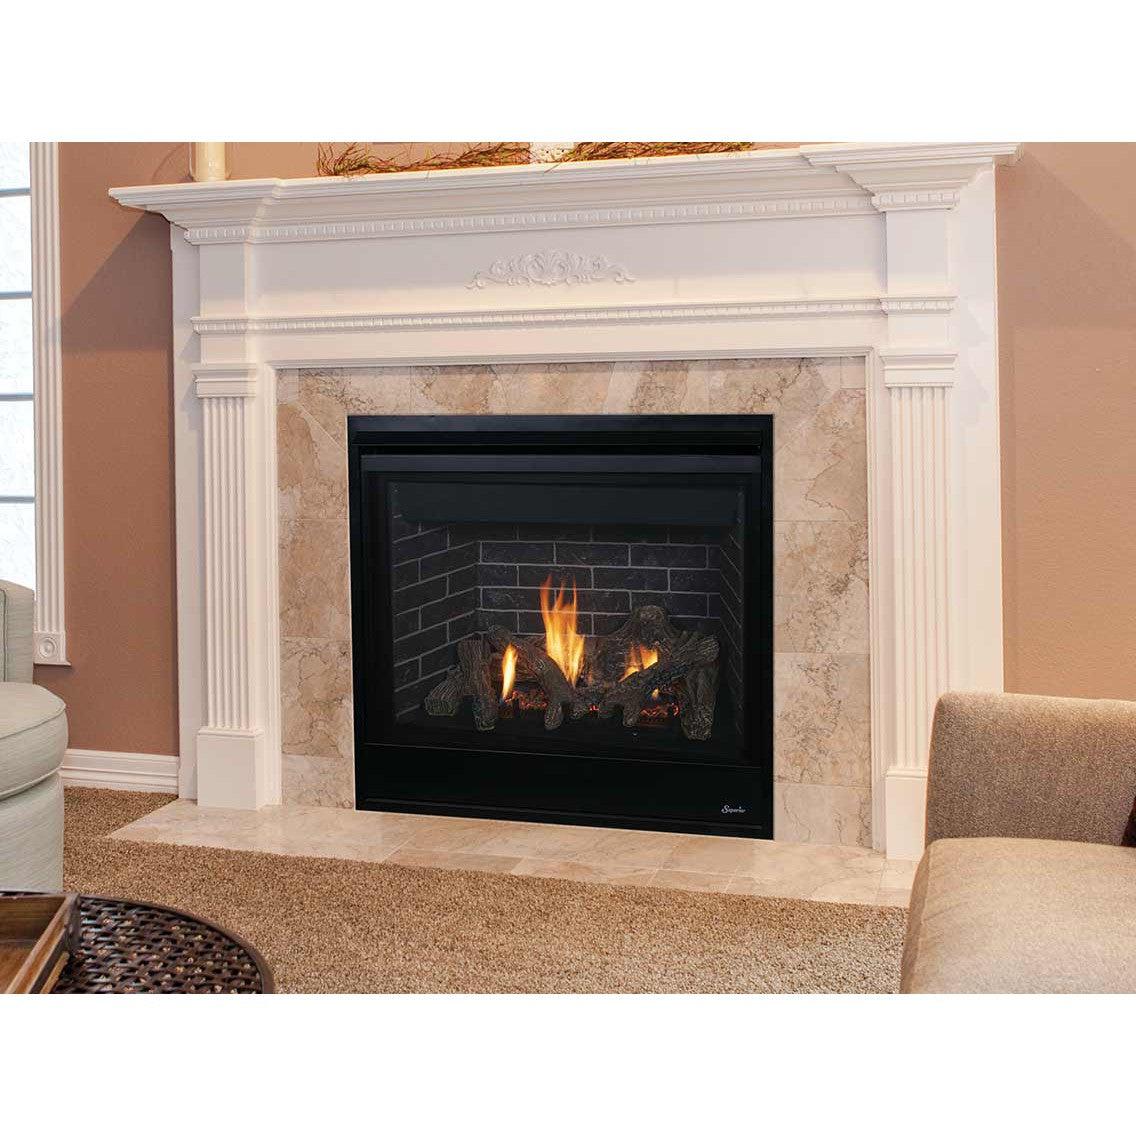 Superior DRT3045 45" Traditional Direct Top/Rear Vent Propane Gas Fireplace With Electronic Ignition